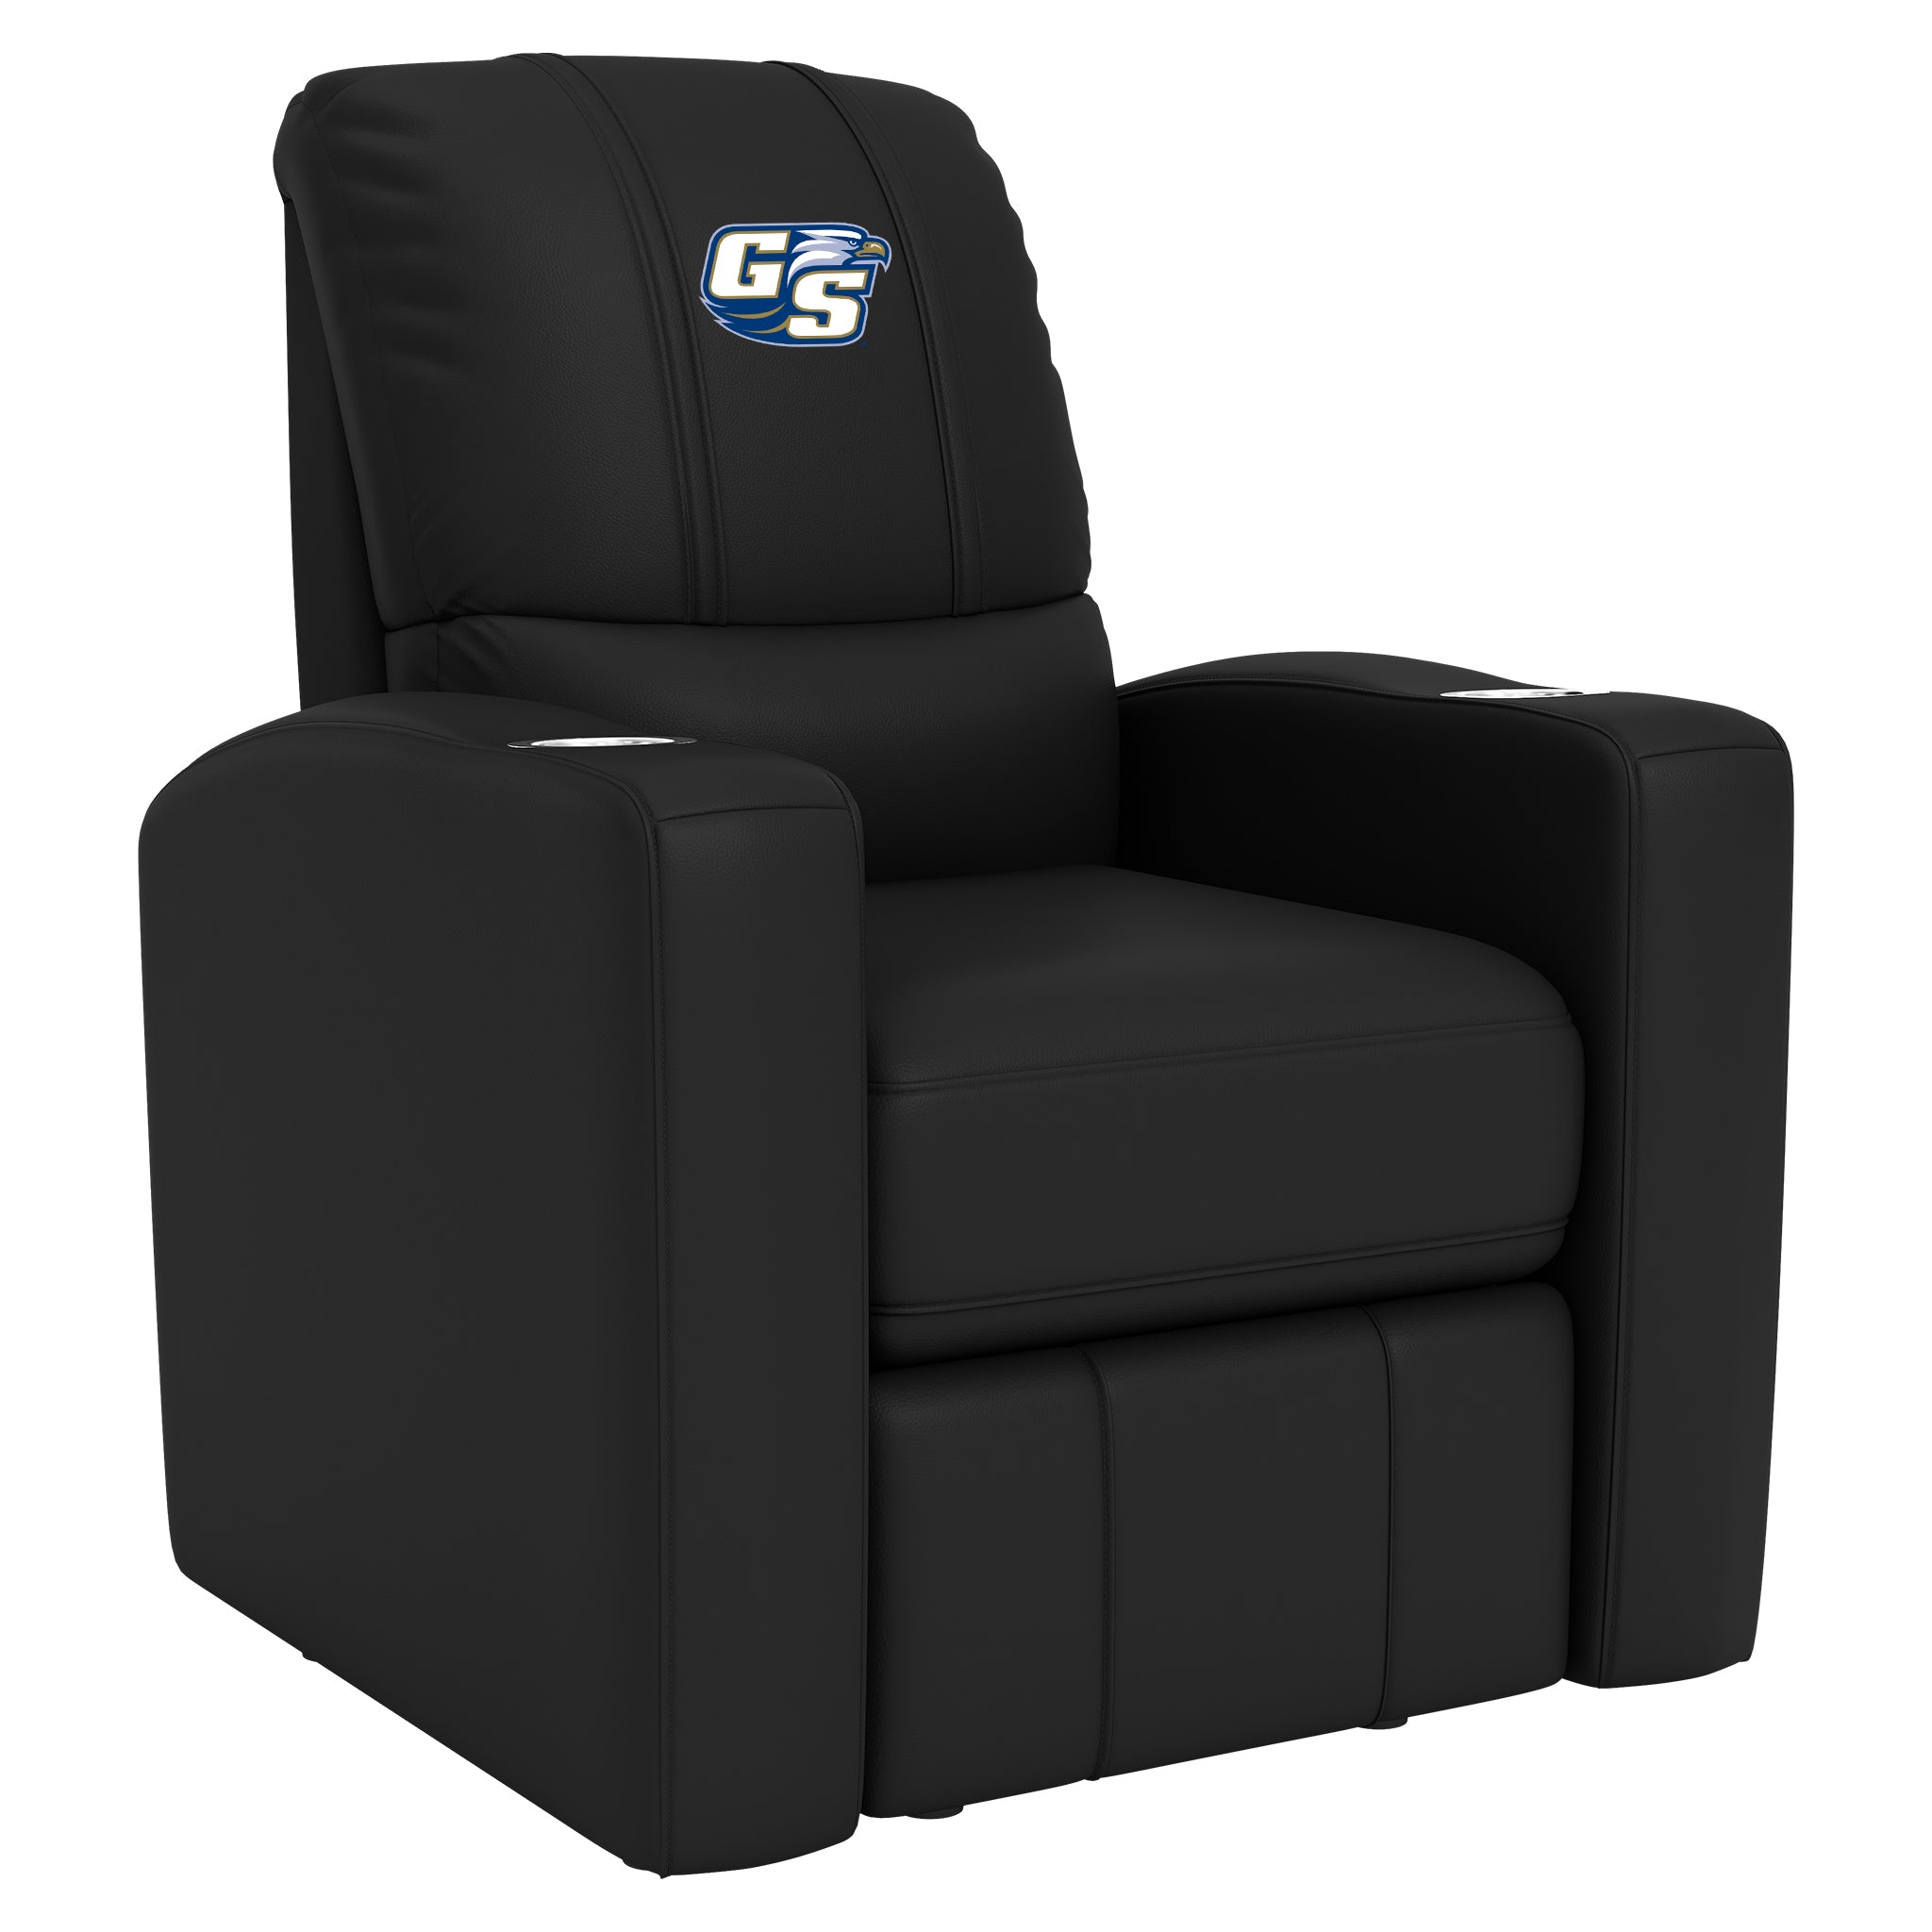 Georgia Southern University Stealth Recliner with Georgia Southern GS Eagles Logo